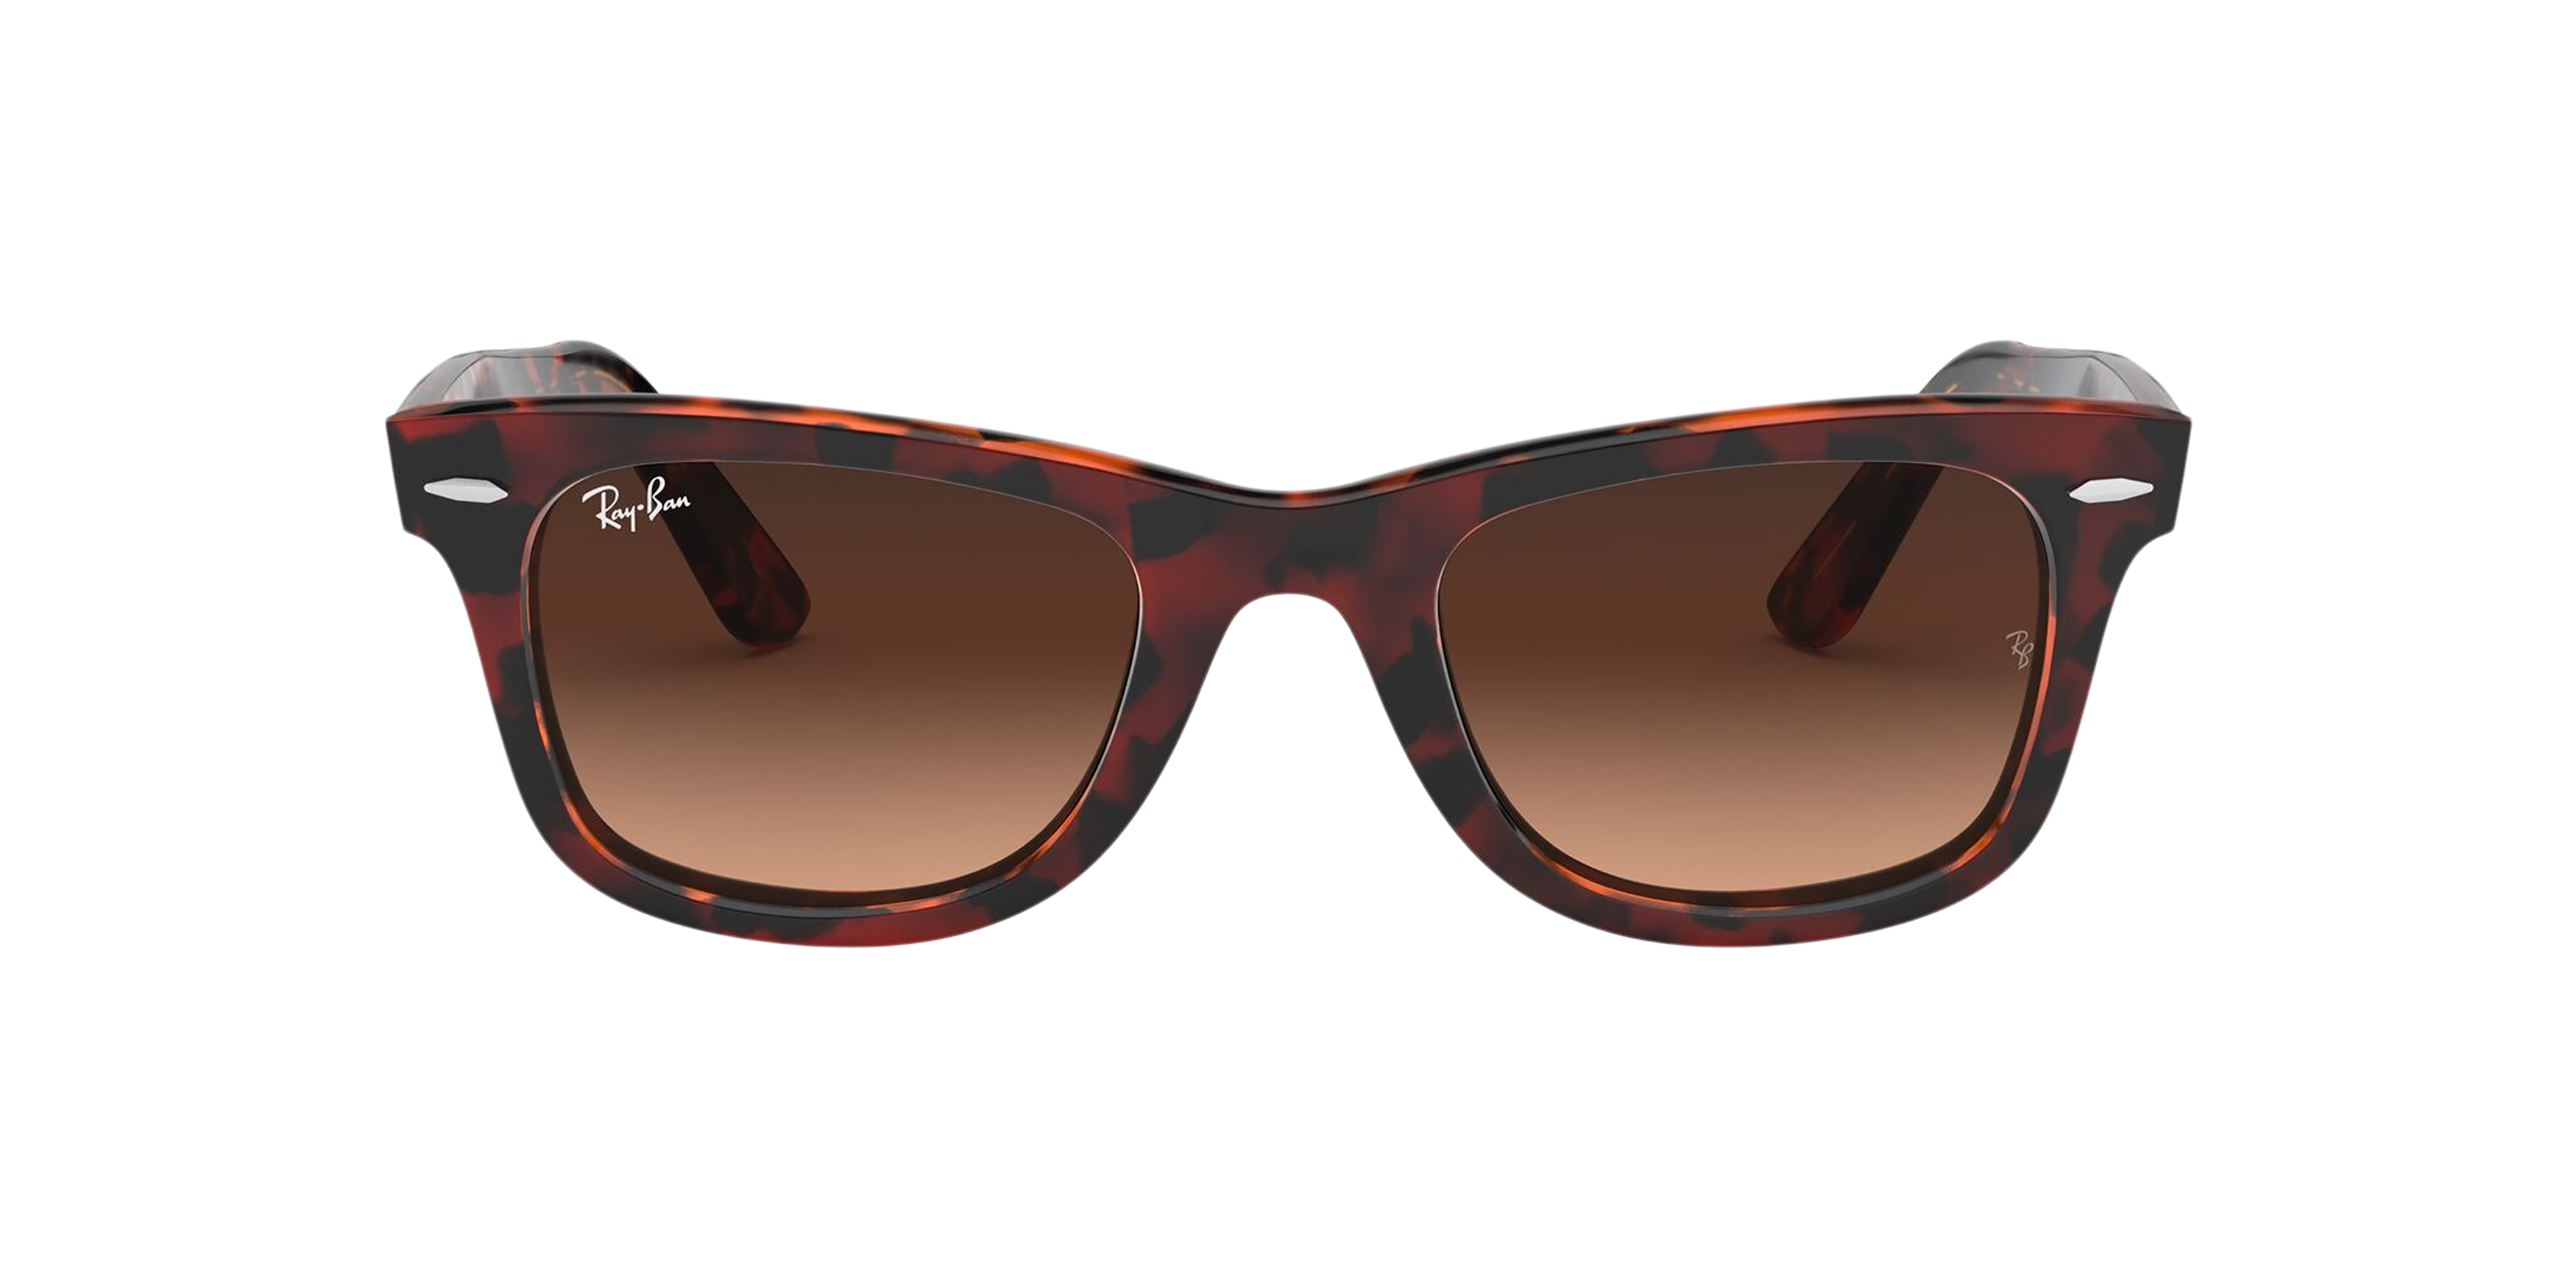 [products.image.front] Ray-Ban Original Wayfarer Color Mix RB2140 1275A5